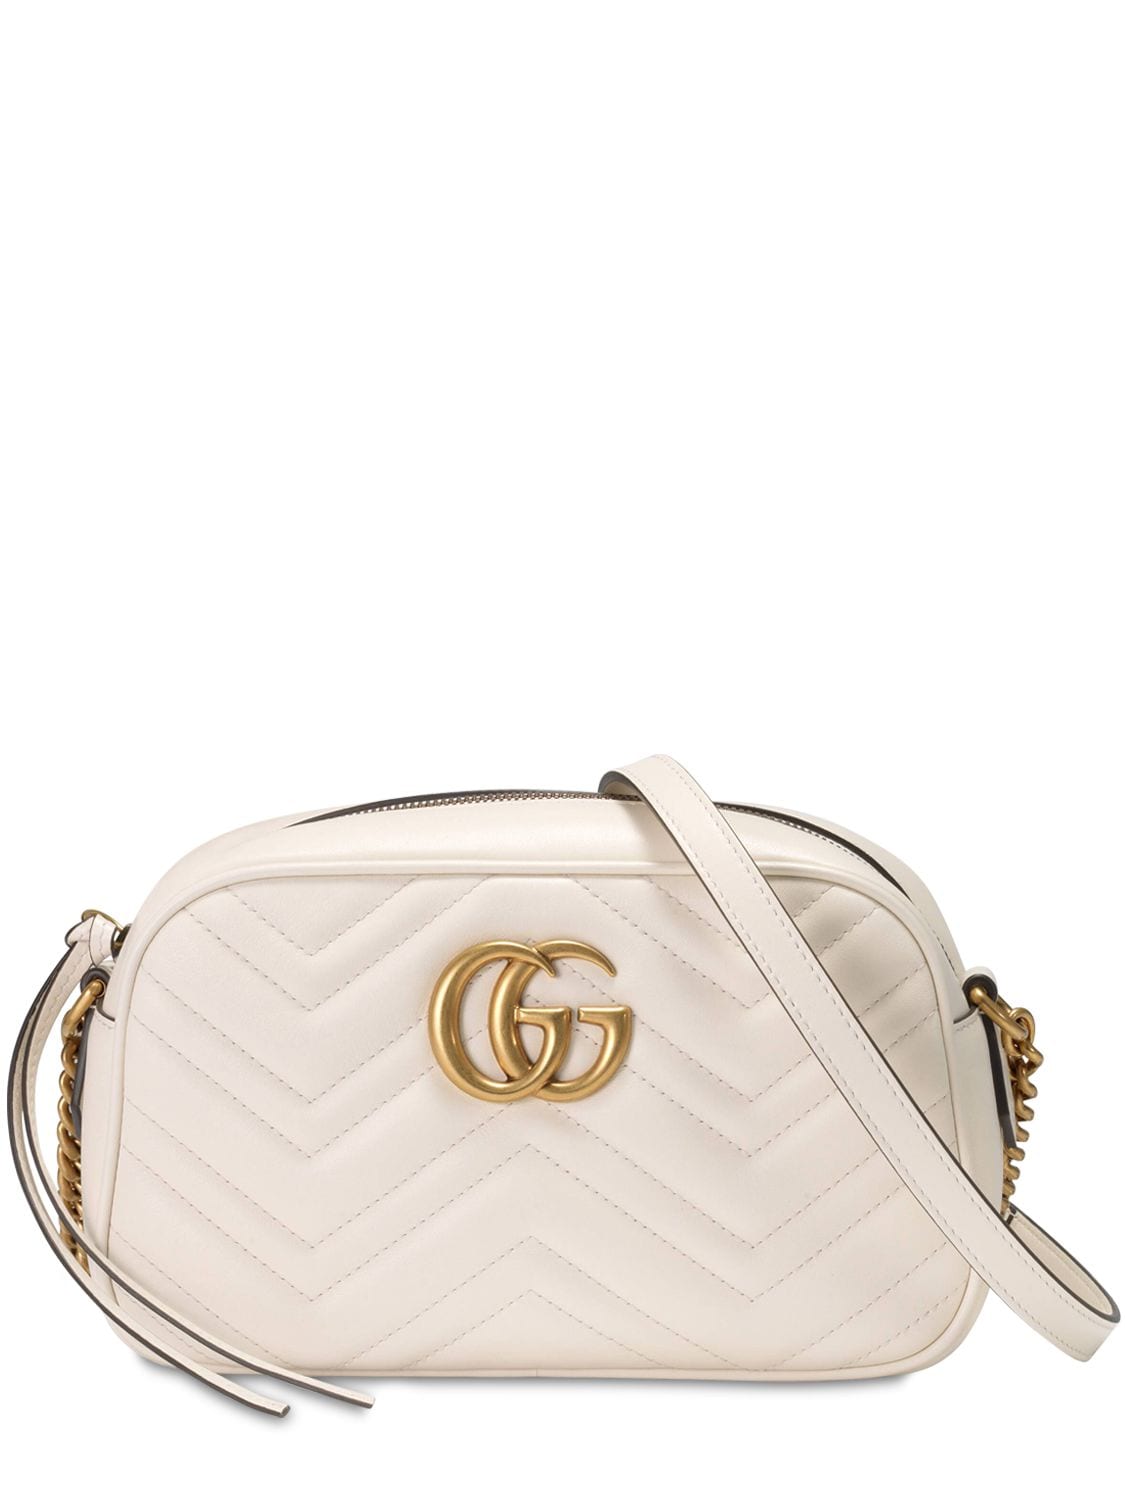 Gucci Gg Marmont Leather Camera Bag In Grey